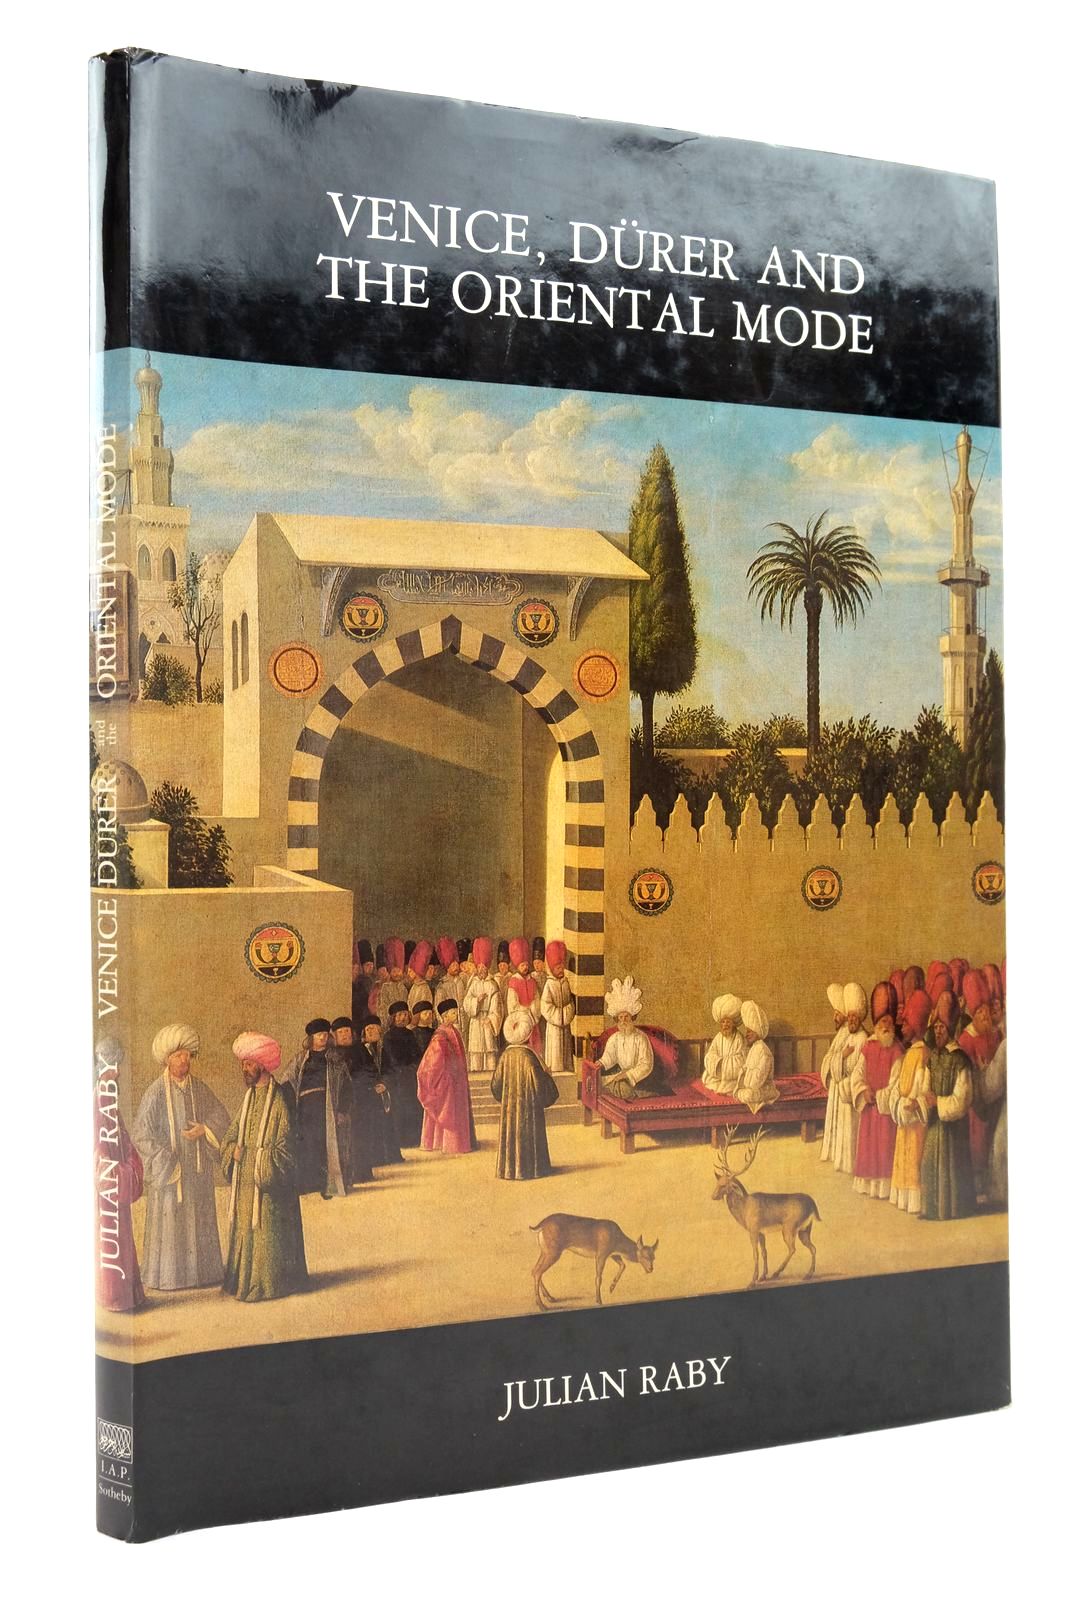 Photo of VENICE, DURER AND THE ORIENTAL MODE written by Raby, Julian published by Islamic Art Publications, Sotheby Publications (STOCK CODE: 2138946)  for sale by Stella & Rose's Books